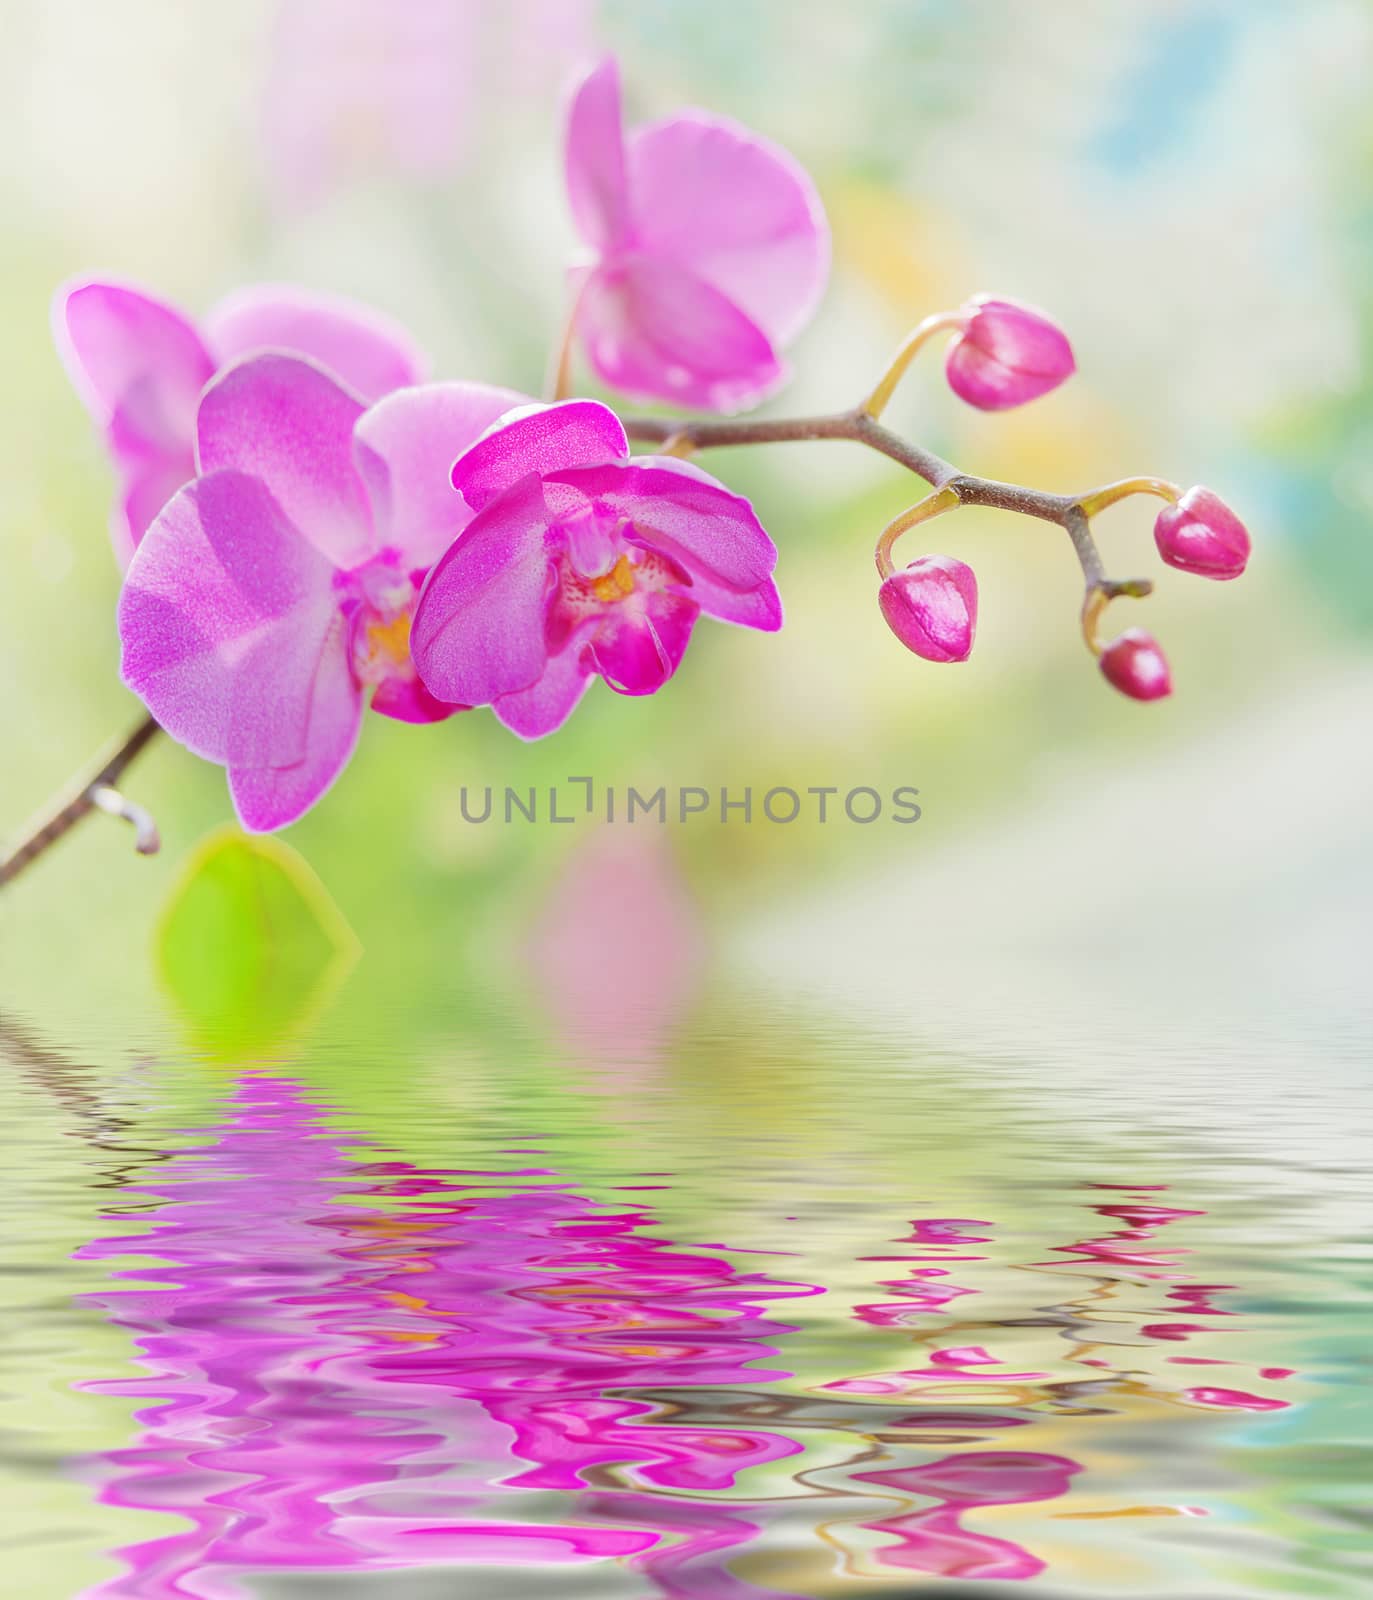 Blossoming branch of purple orchids on a nature background, with reflection in the water surface